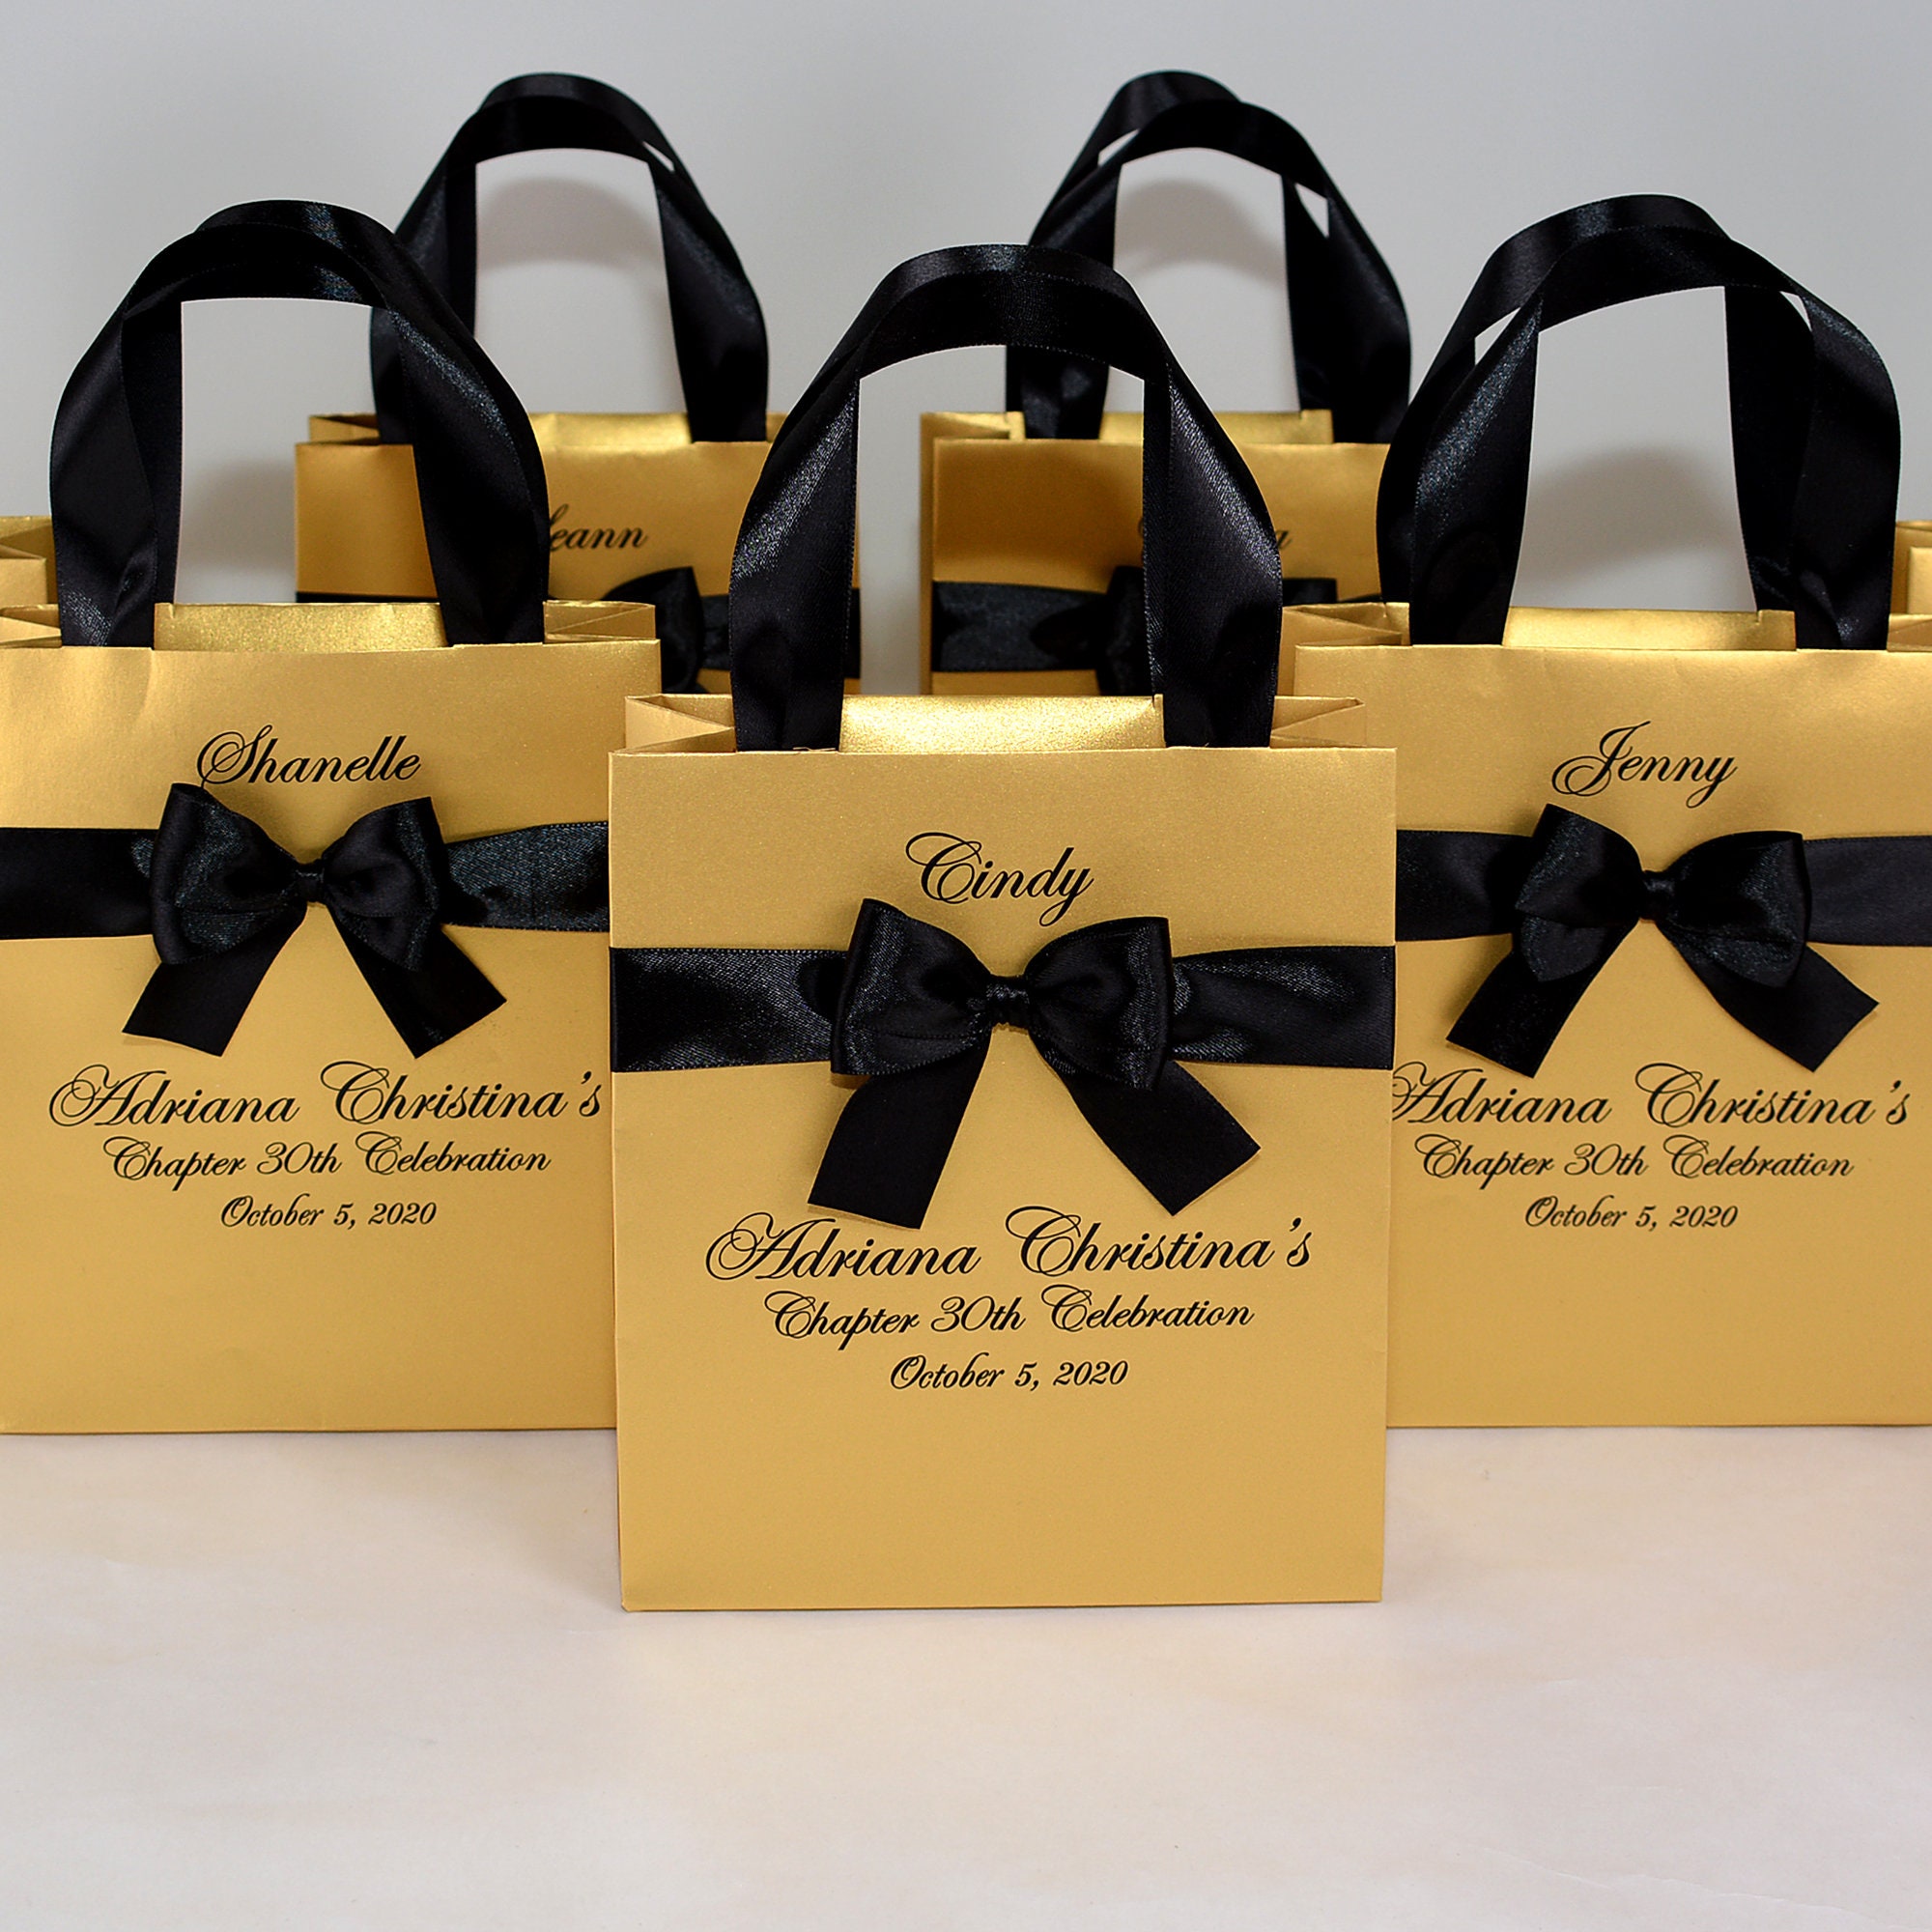 Buy Luxury Black Gold 30th Birthday Party Pack for 10 People 30th